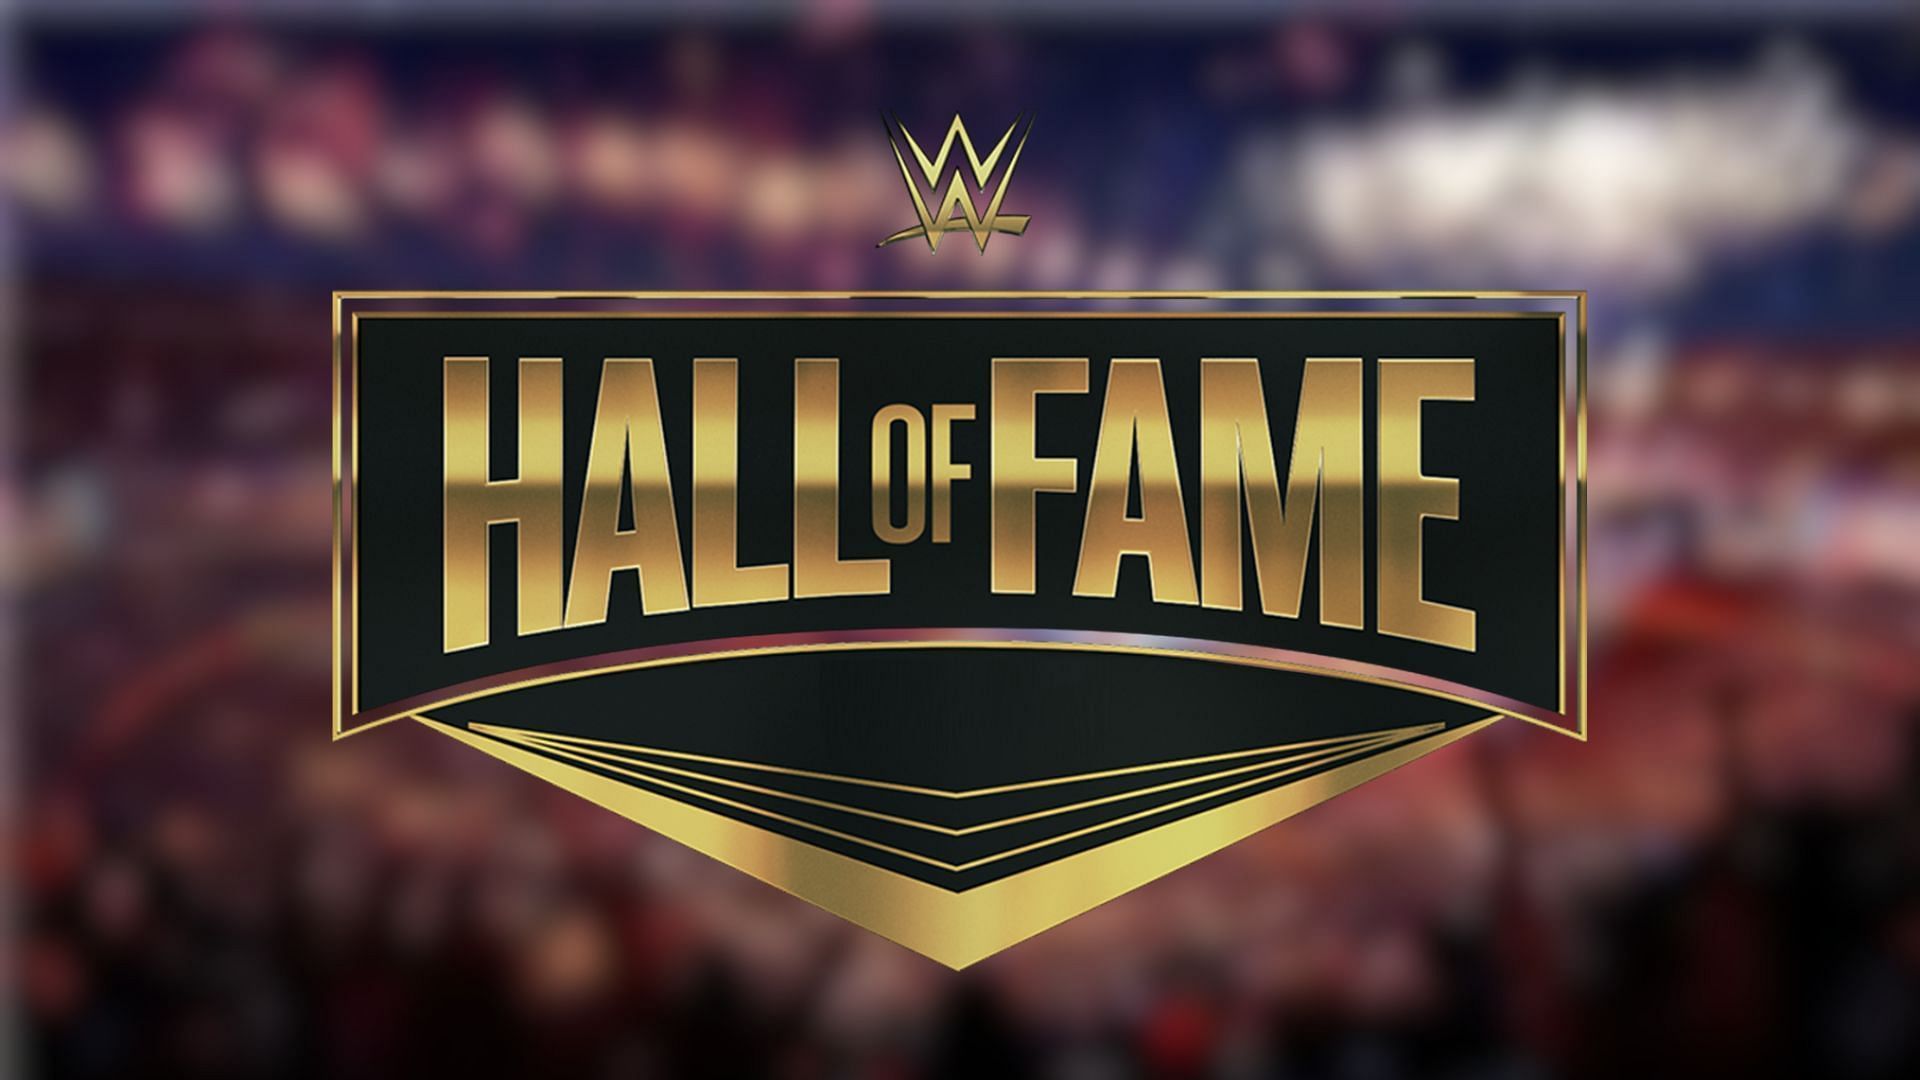 Wrestling legend claims he should be inducted into the WWE Hall of Fame